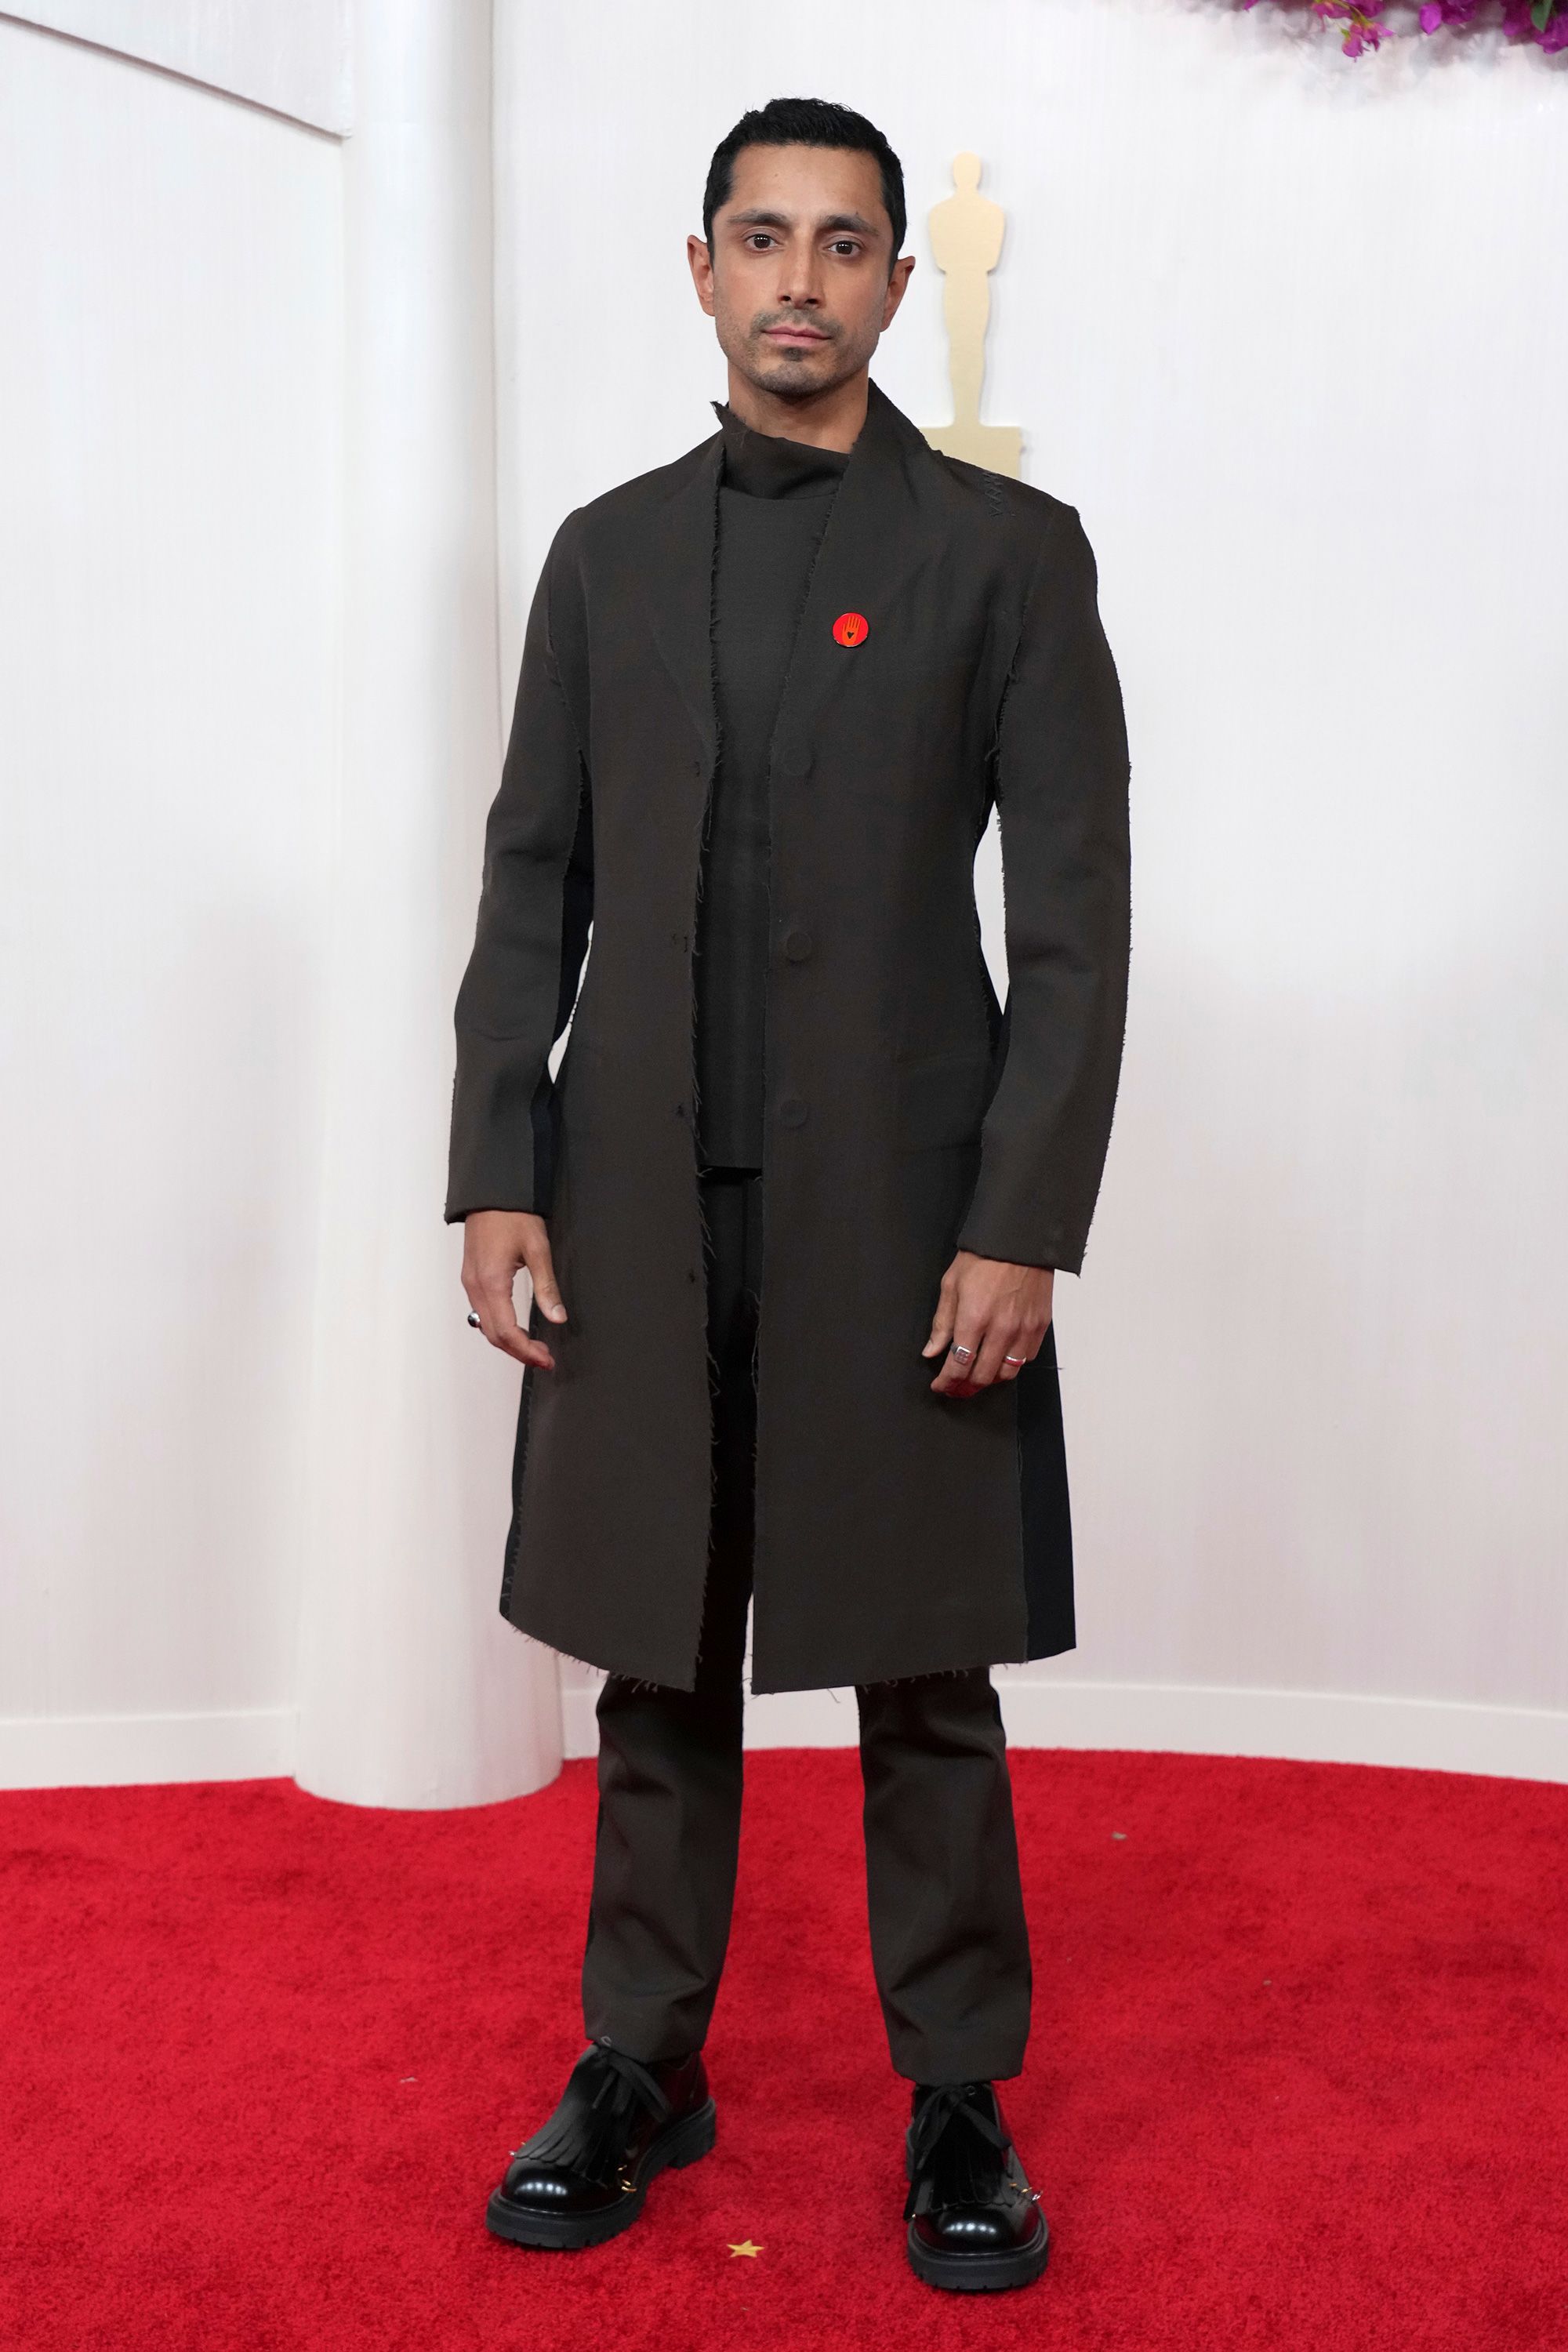 Riz Ahmed arrived in a black ensemble by Marni featuring a knee-length coat.